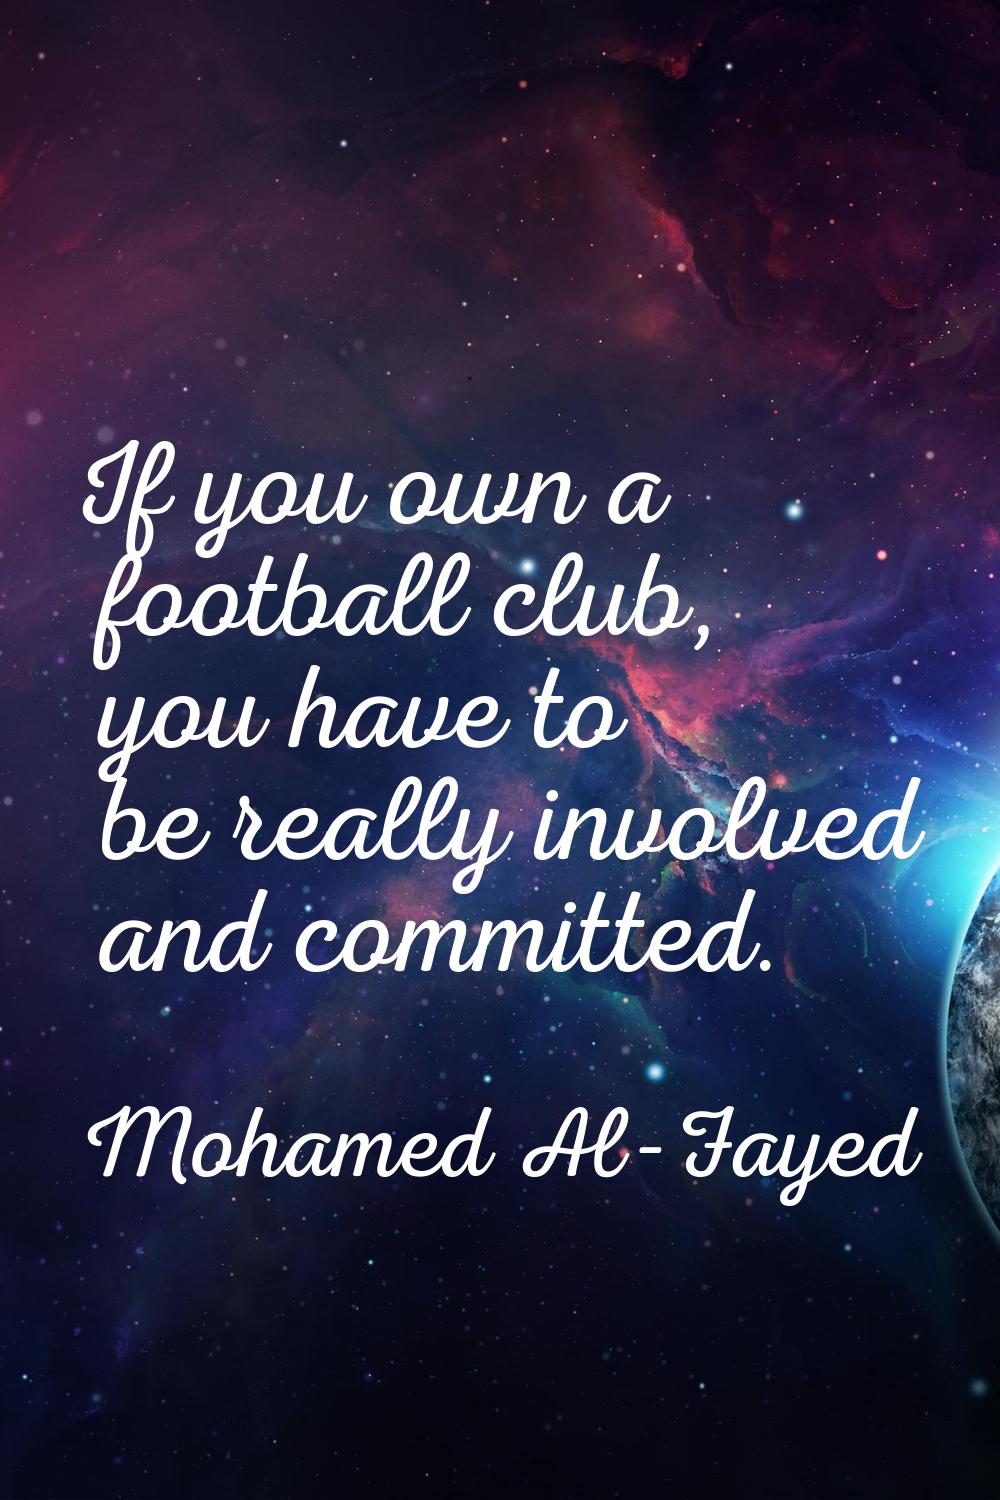 If you own a football club, you have to be really involved and committed.